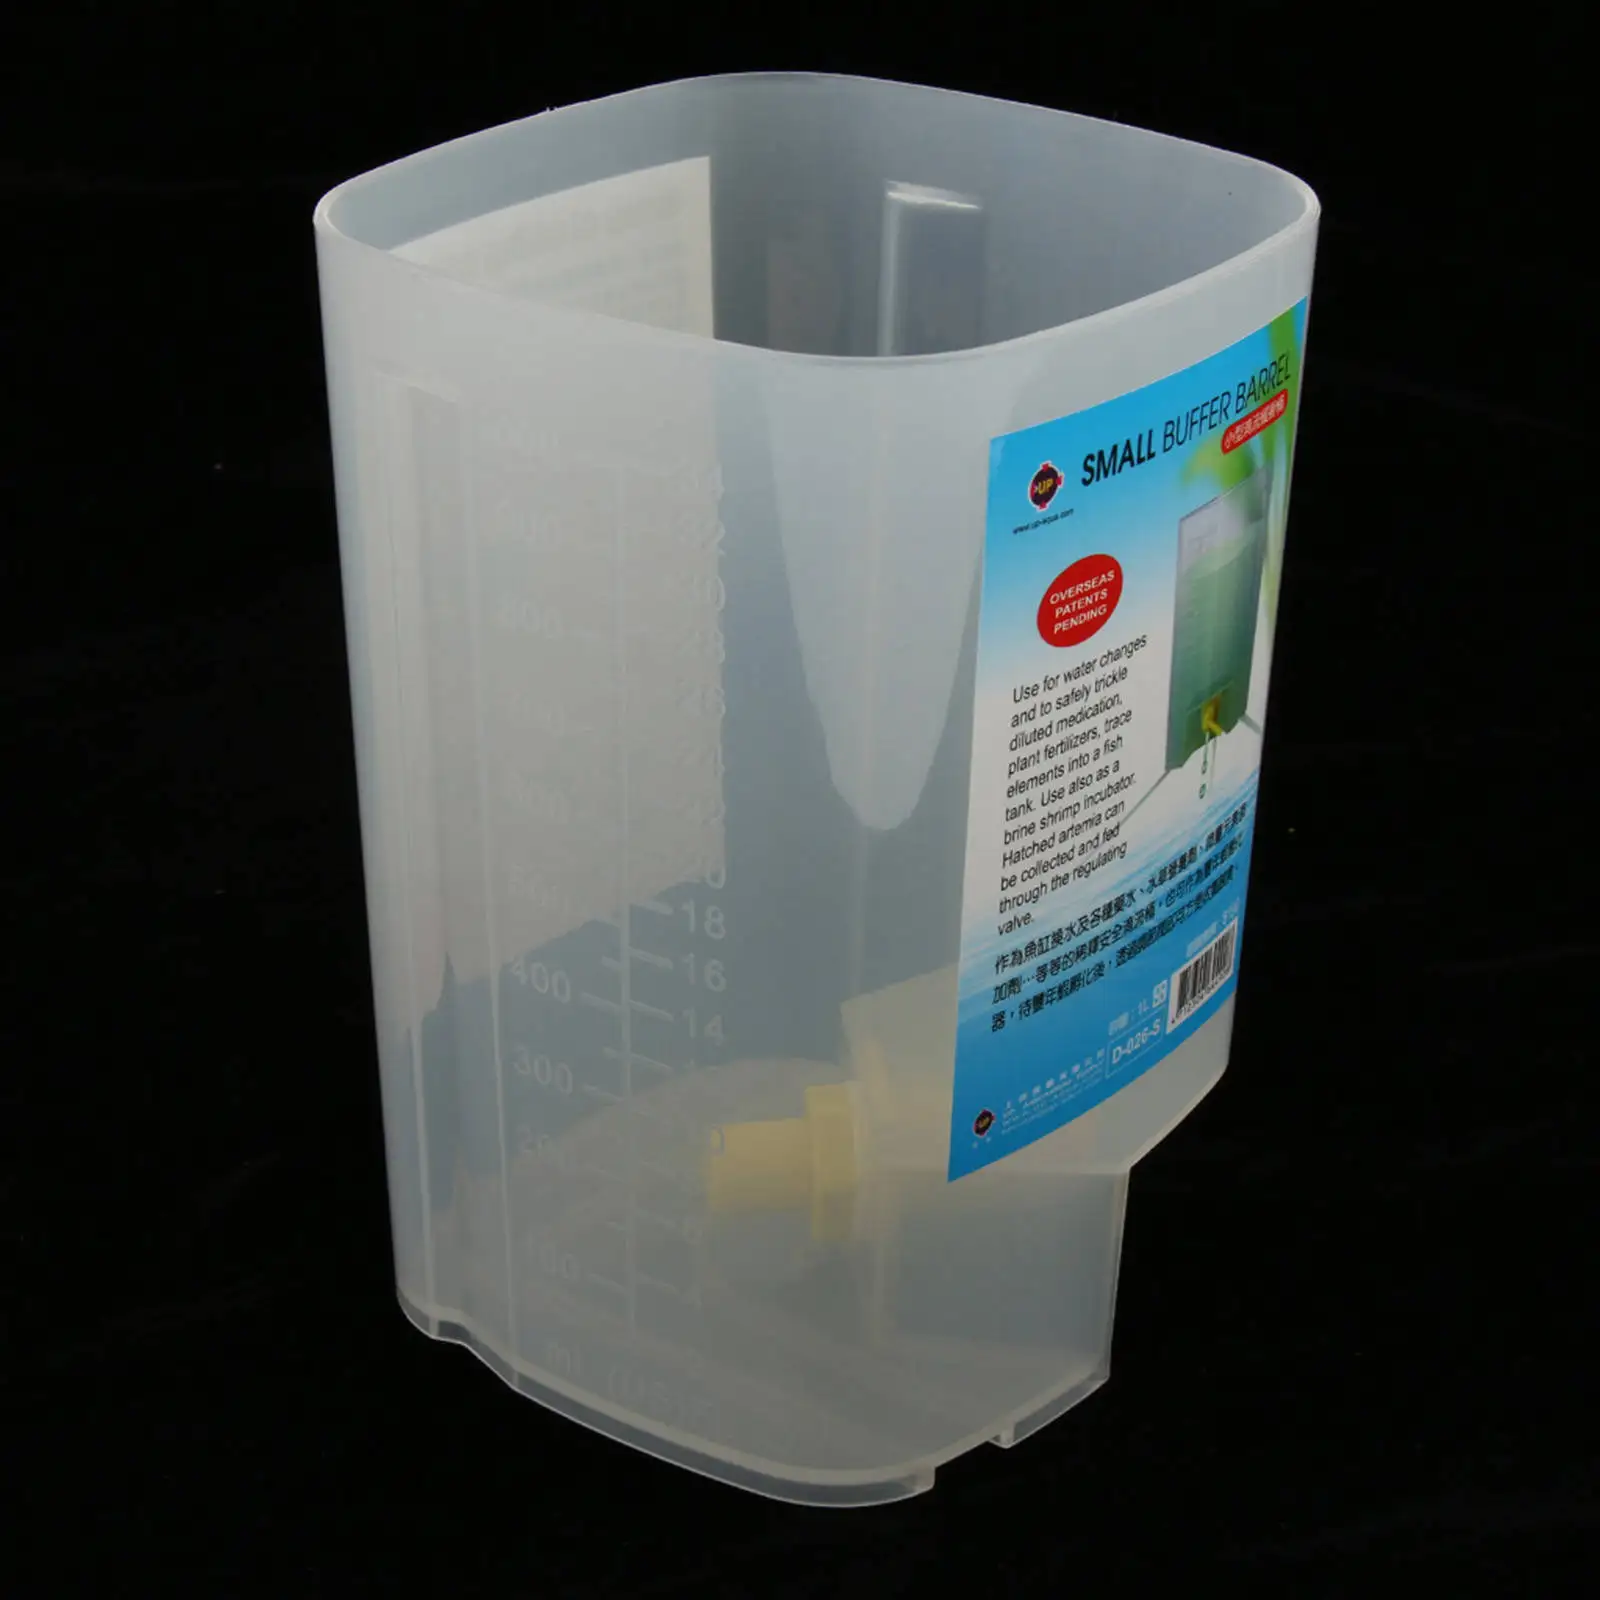 1L Aquarium Change Bucket Aquarium Water Exchanger for Ecological Fish Tank Water Added Container